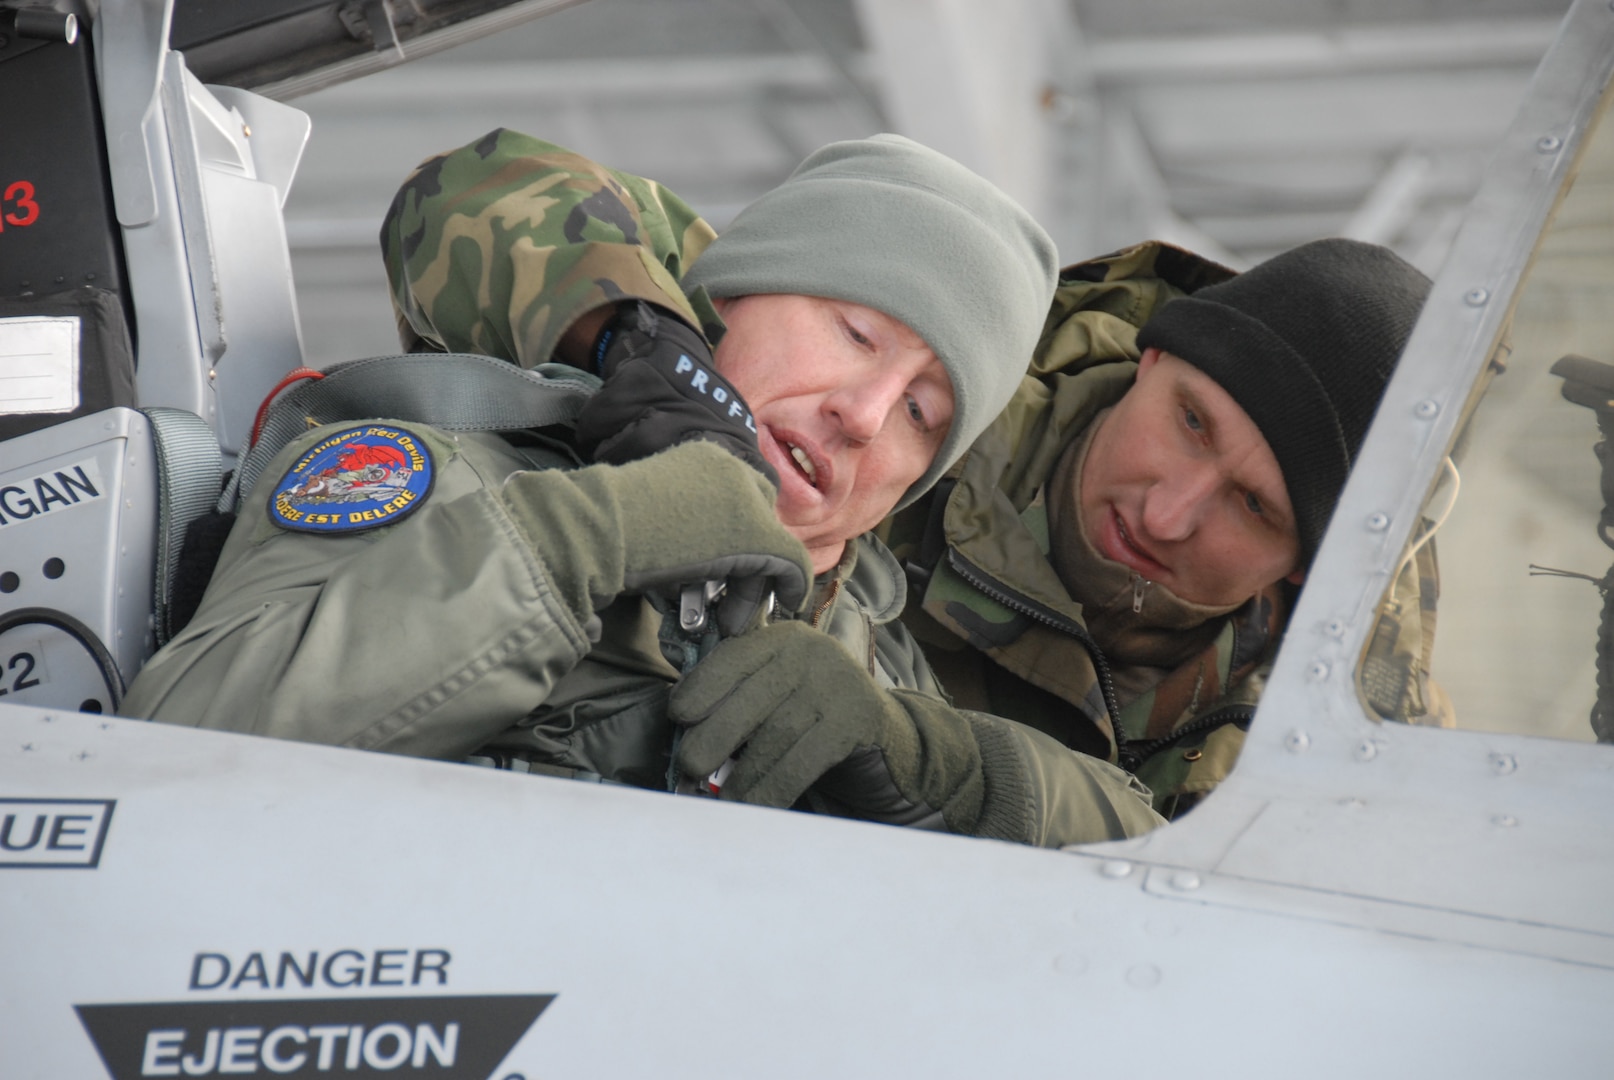 Lt. Col. Doug Champagne, commander of the 107th Fighter Squadron of the Michigan Air National Guard, is strapped into the A-10 that he deployed in as part of Operation Demons to DM on Jan. 9, 2010. After just six months of flying the A-10 mission at Selfridge Air National Guard Base, the 107th's Red Devils along with about 120 maintenance and support personnel, deployed to Davis-Monthan Air Force Base, Ariz., where the Michigan Guardsmen took advantage of the ideal weather conditions to to prepare to upcoming missions in support of global operations.